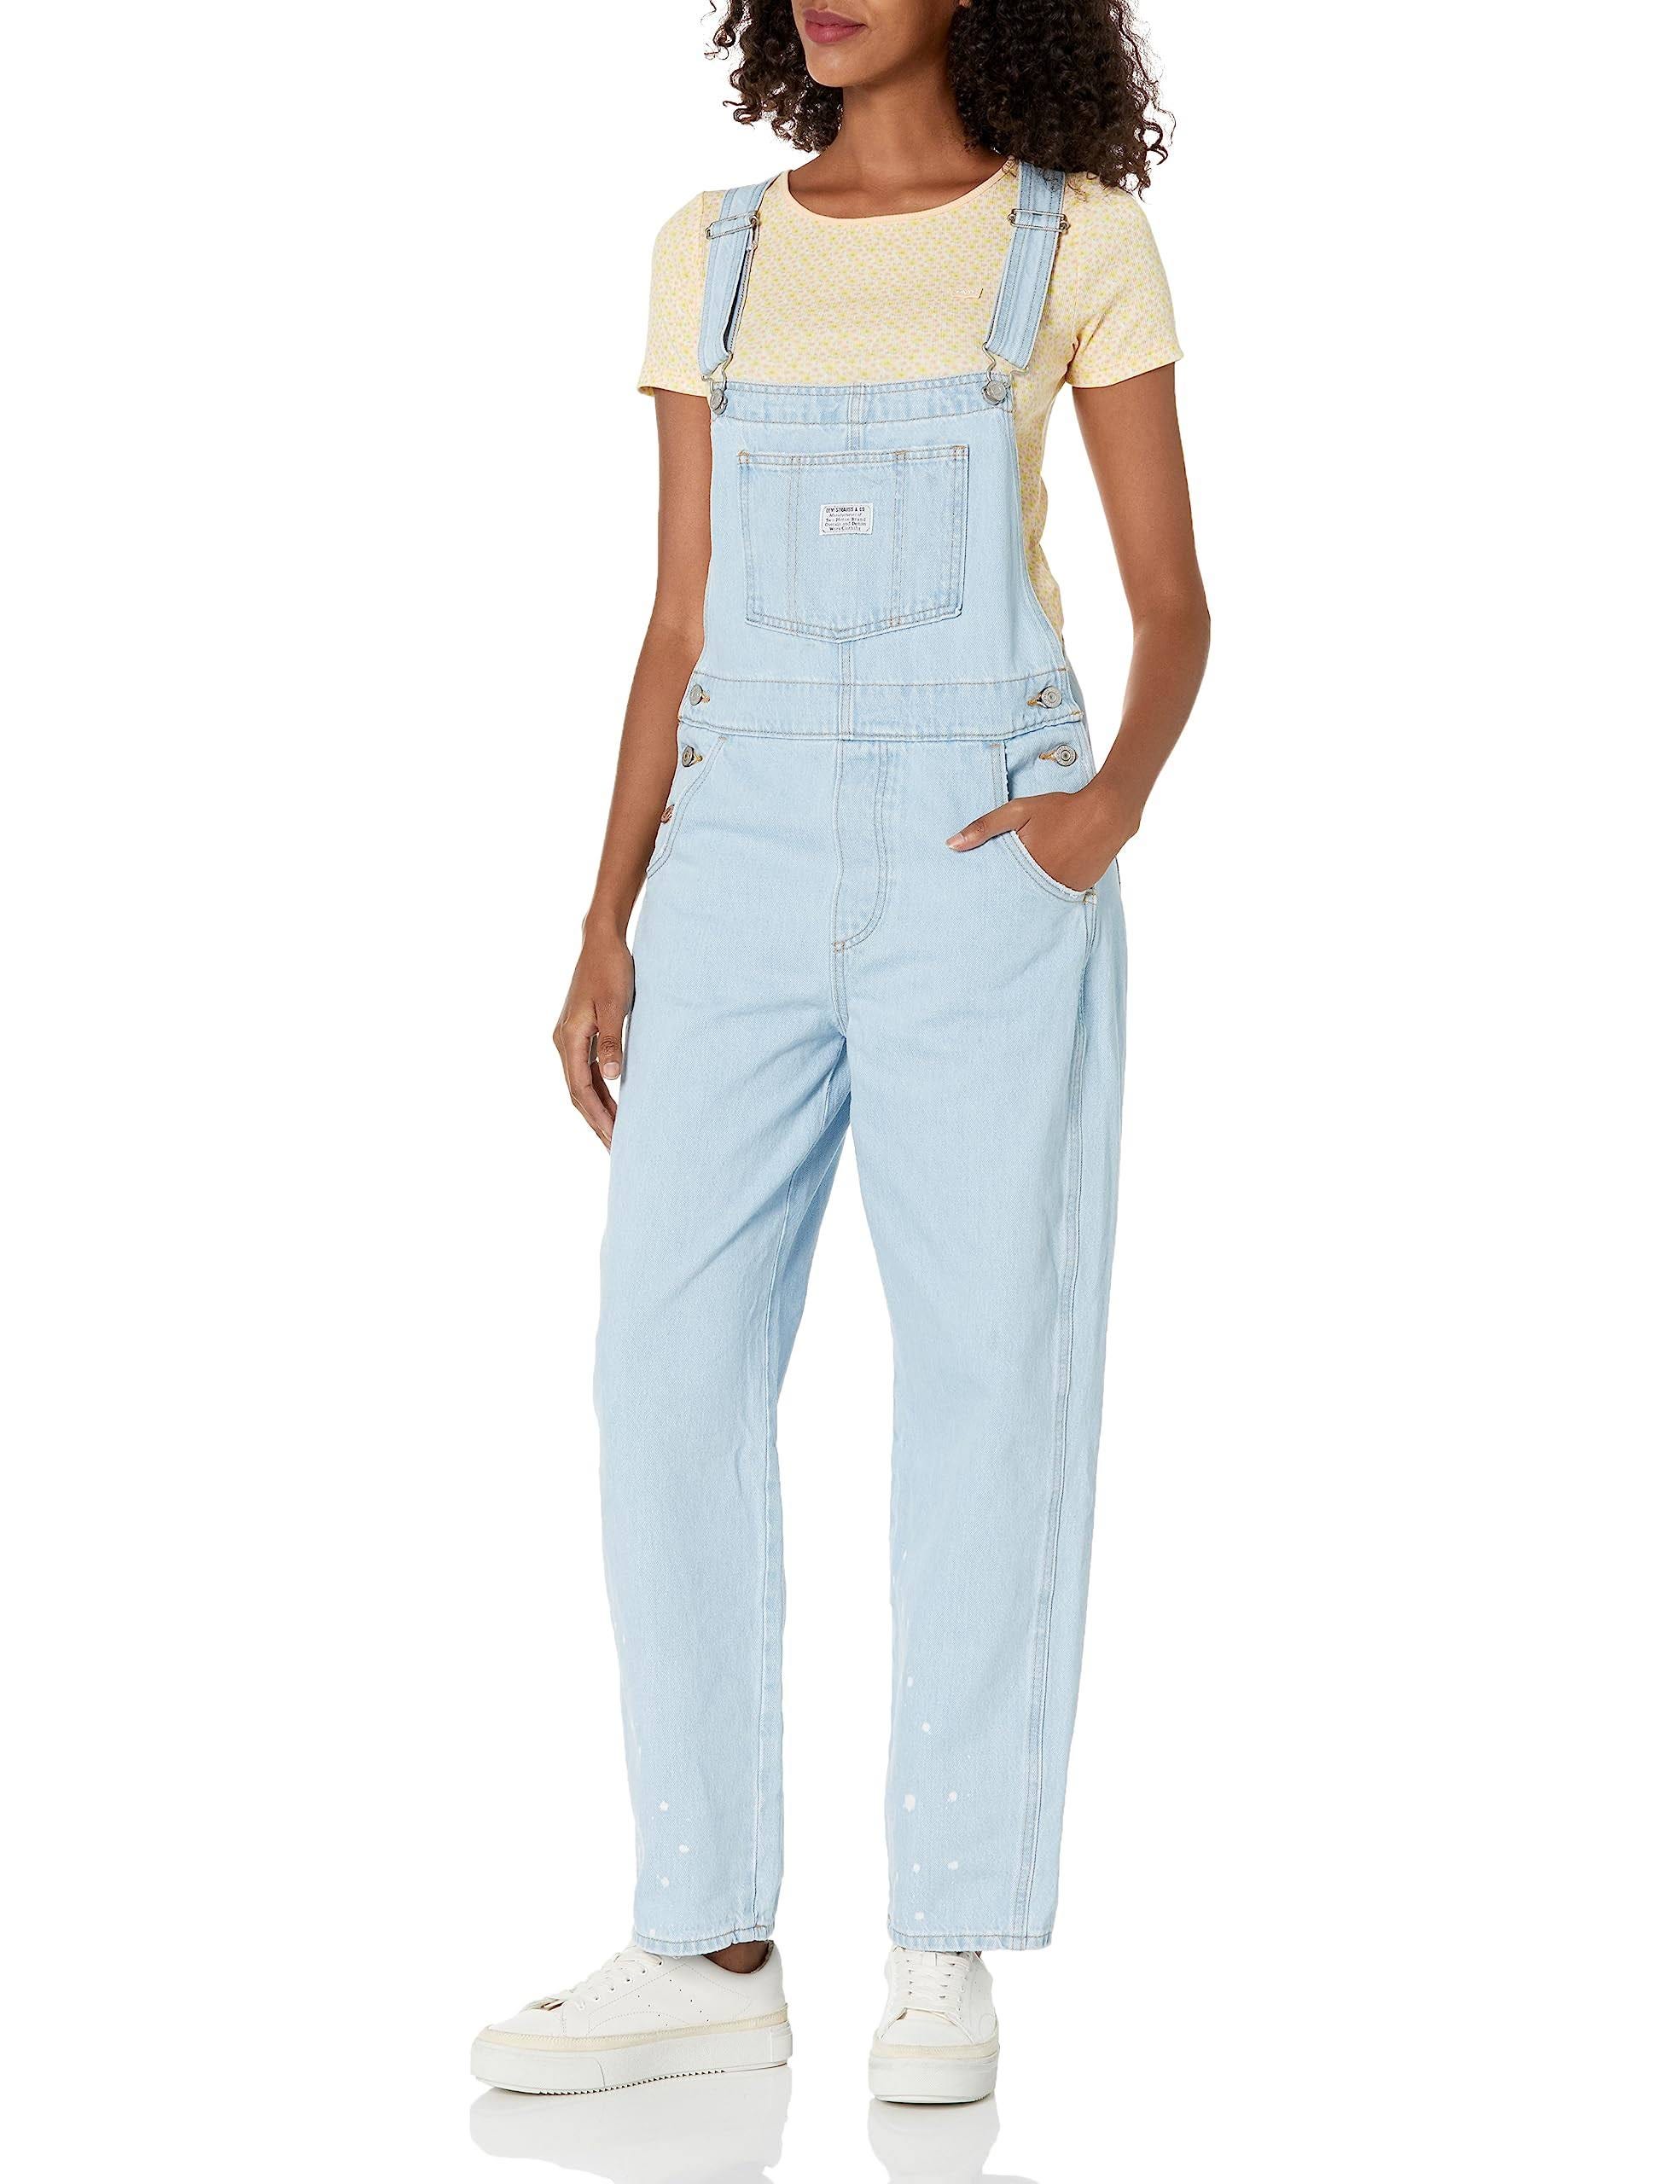 Vintage Denim Overalls with High Rise and Relaxed Fit | Image